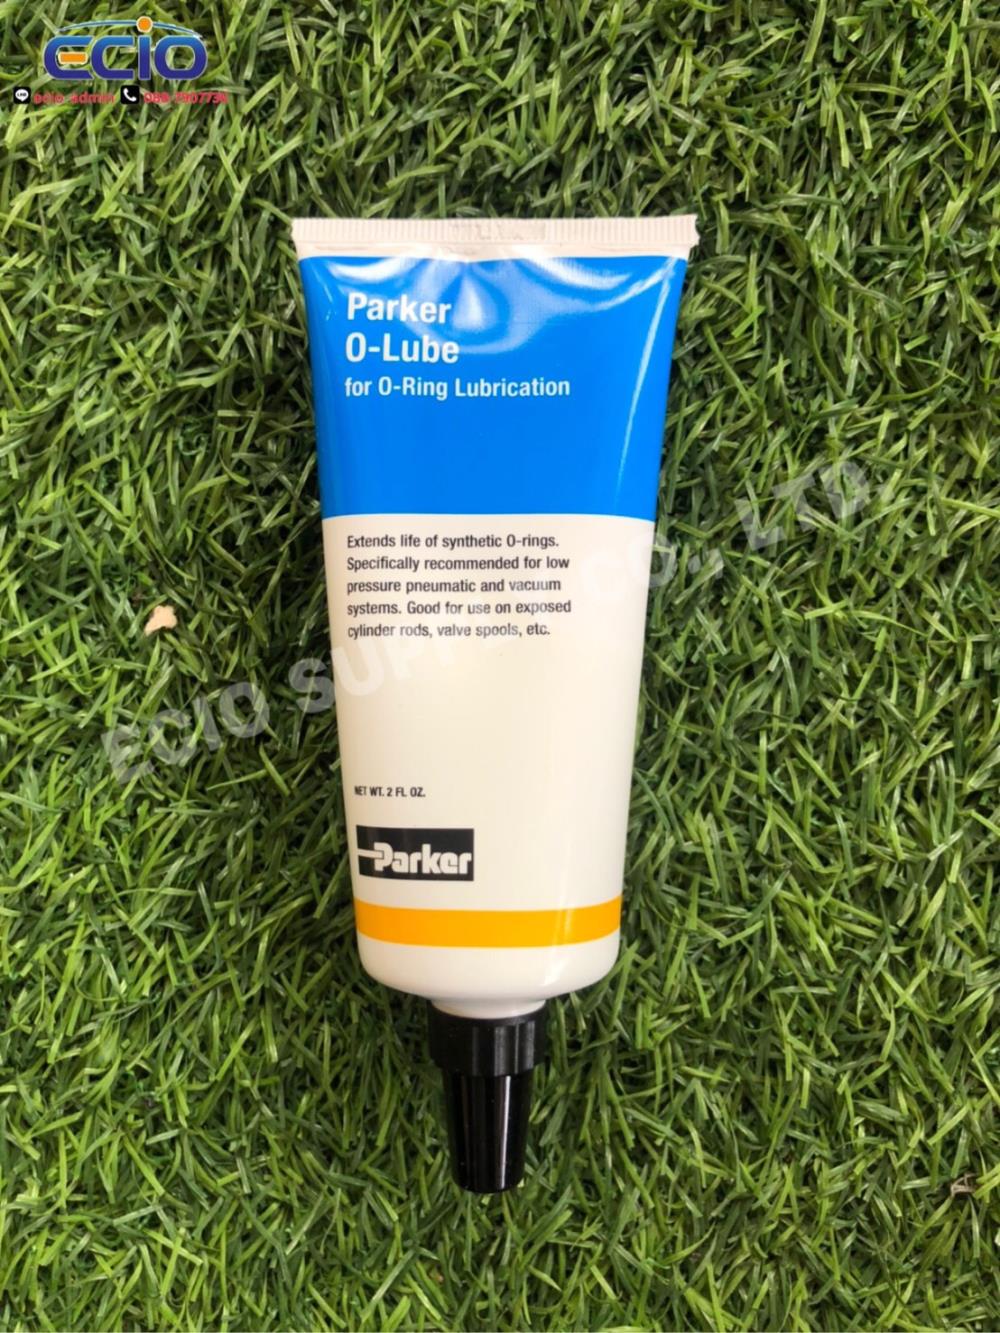 Parker 884-2 O-Lube for O-Ring Lubrication - 2 oz. น้ำมันหล่อลื่นโอริง,Parker 884-2 O-Lube for O-Ring Lubrication - 2 oz. ,PARKER,Hardware and Consumable/Lubricants and Coolents